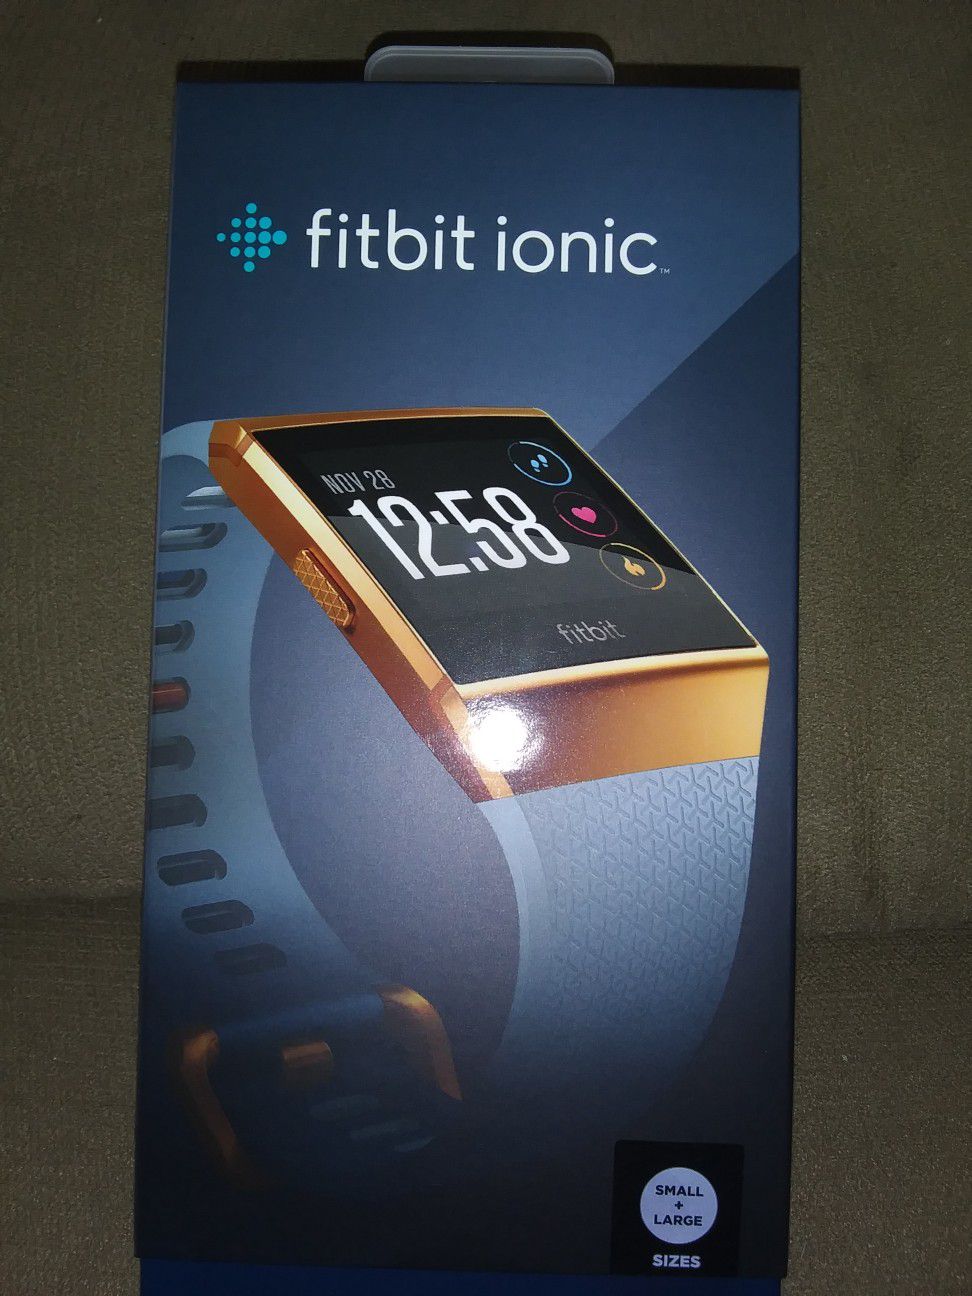 Fitbit ionic and Fitbit inspire